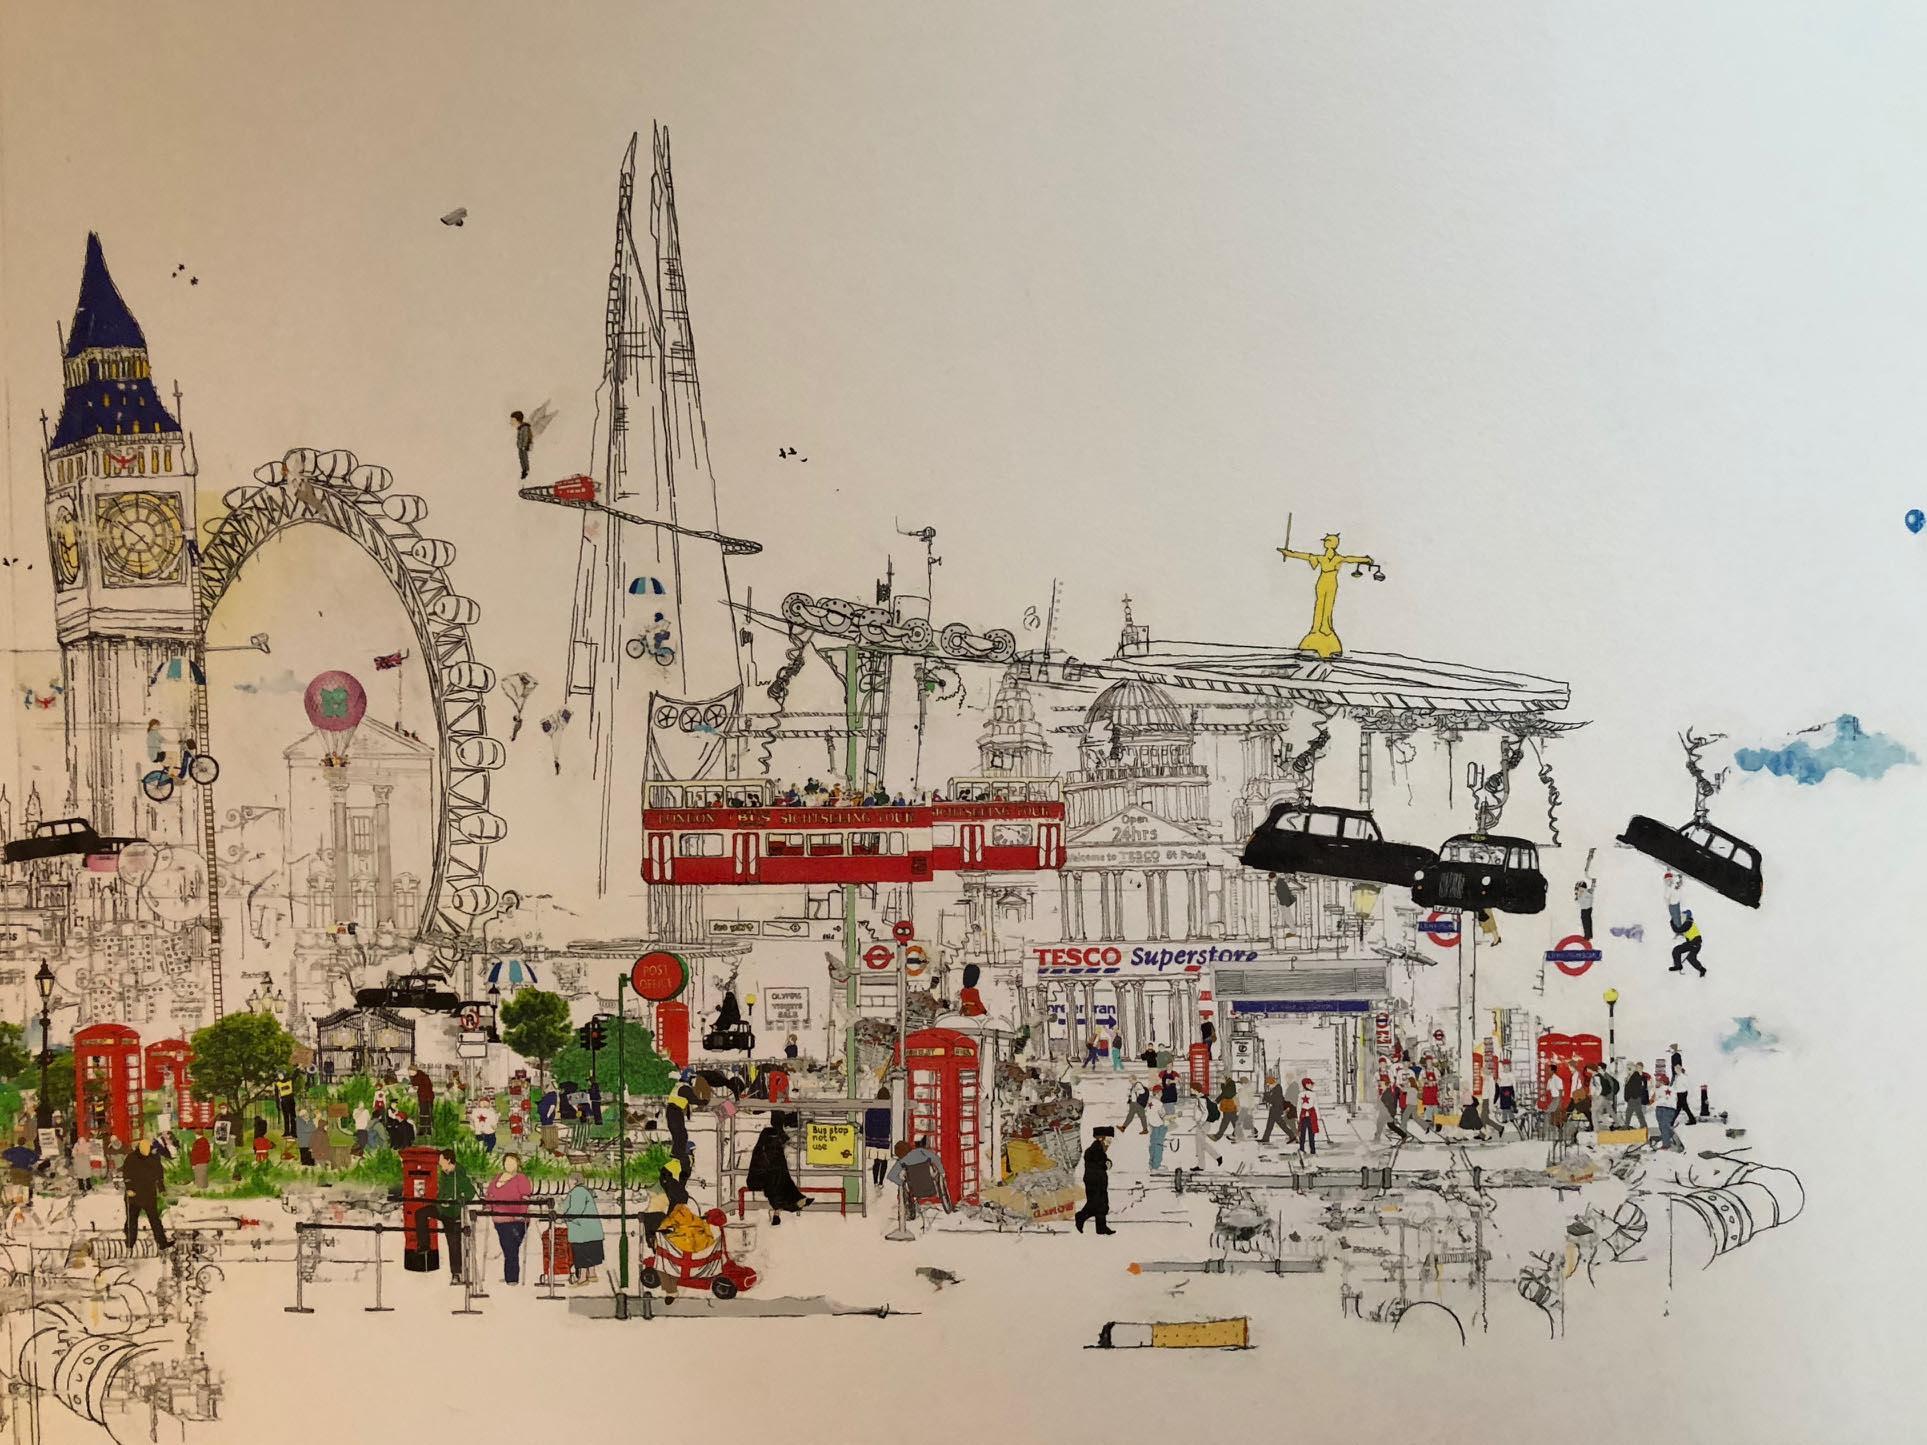 Scandal in the Background - London Landscape - Laura Jordan - Contemporary artist
An original pen, ink and collage on drawing paper.
100 x 160cm - paper size
110 x 170cm - frame size
Framed in a simple black frame. 
Signed, editioned and titled by